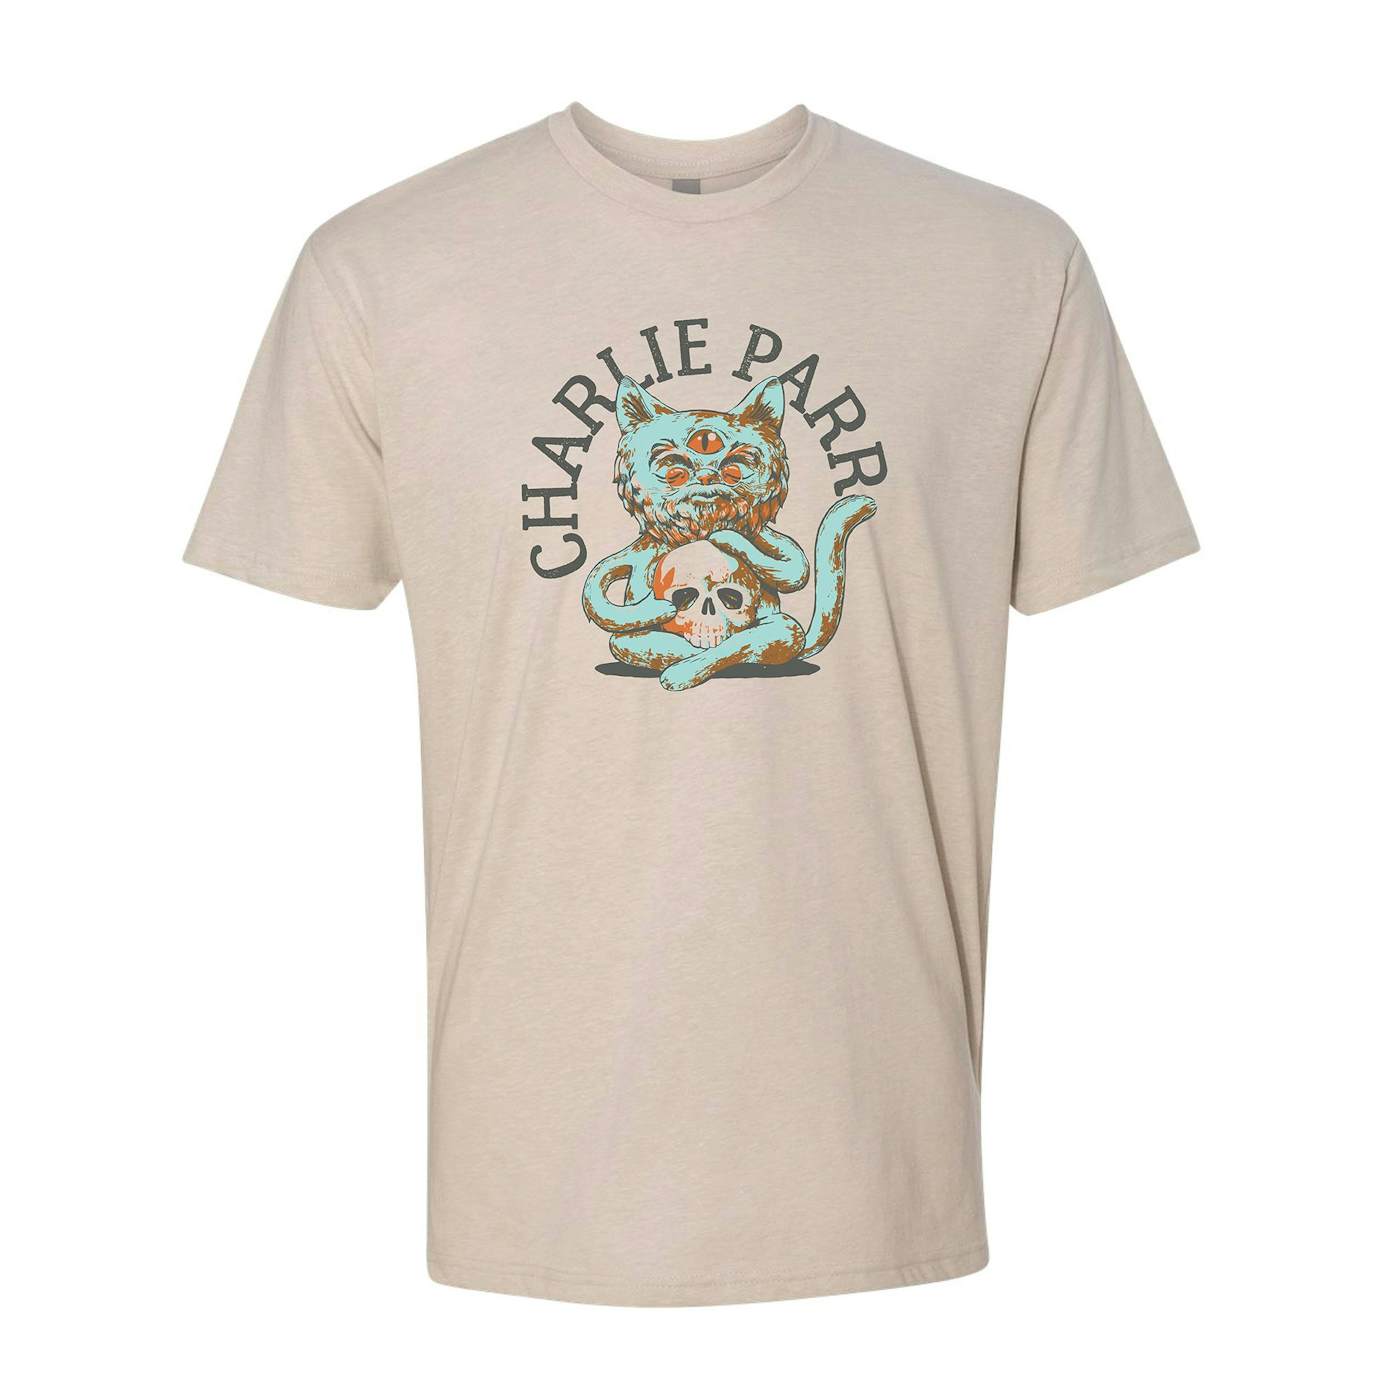 Charlie Parr Cat Tee (Limited Edition)